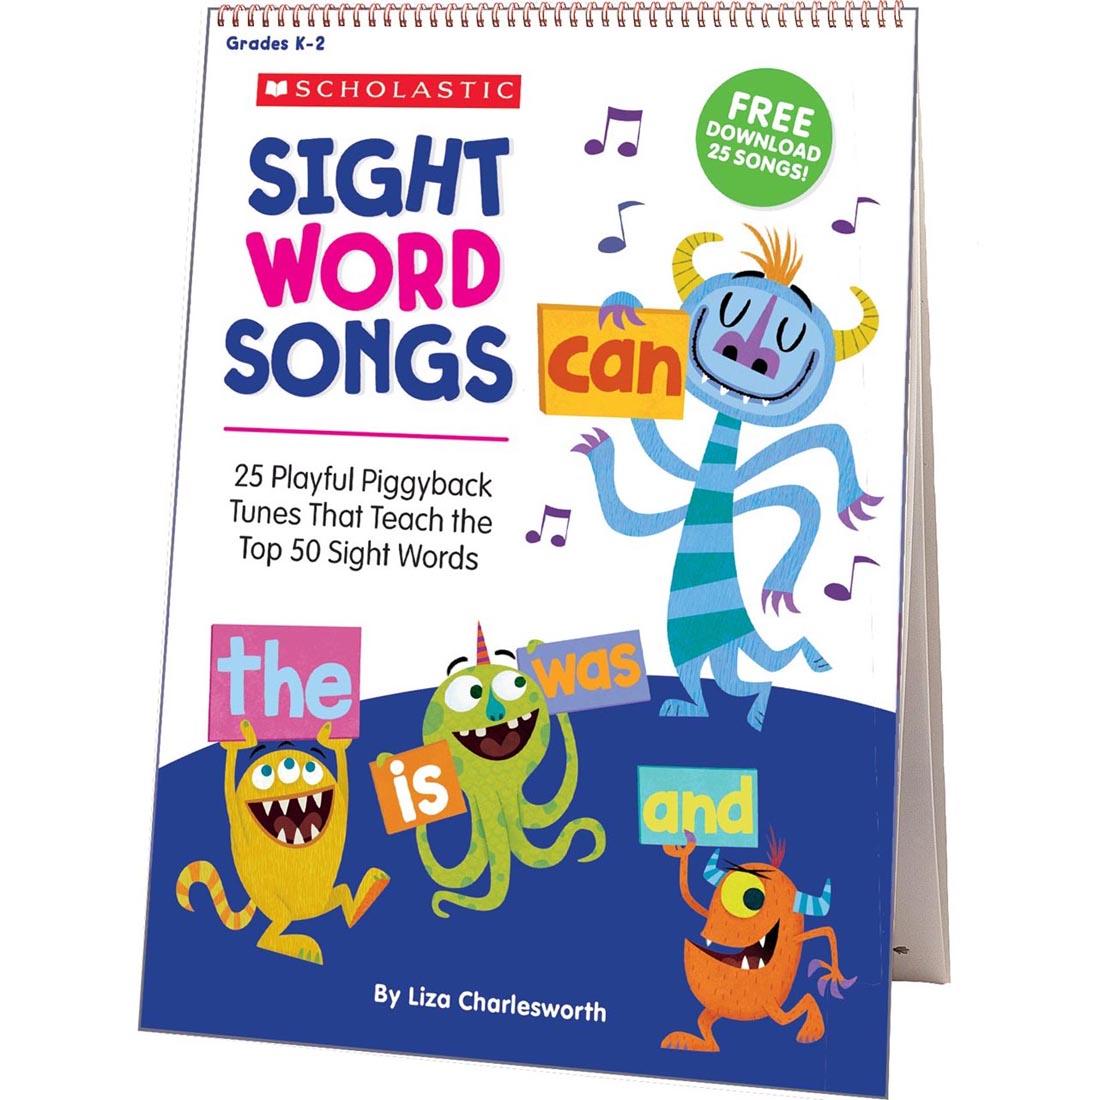 Sight Word Songs Flip Chart by Scholastic, featuring 25 songs that teach 50 sight words